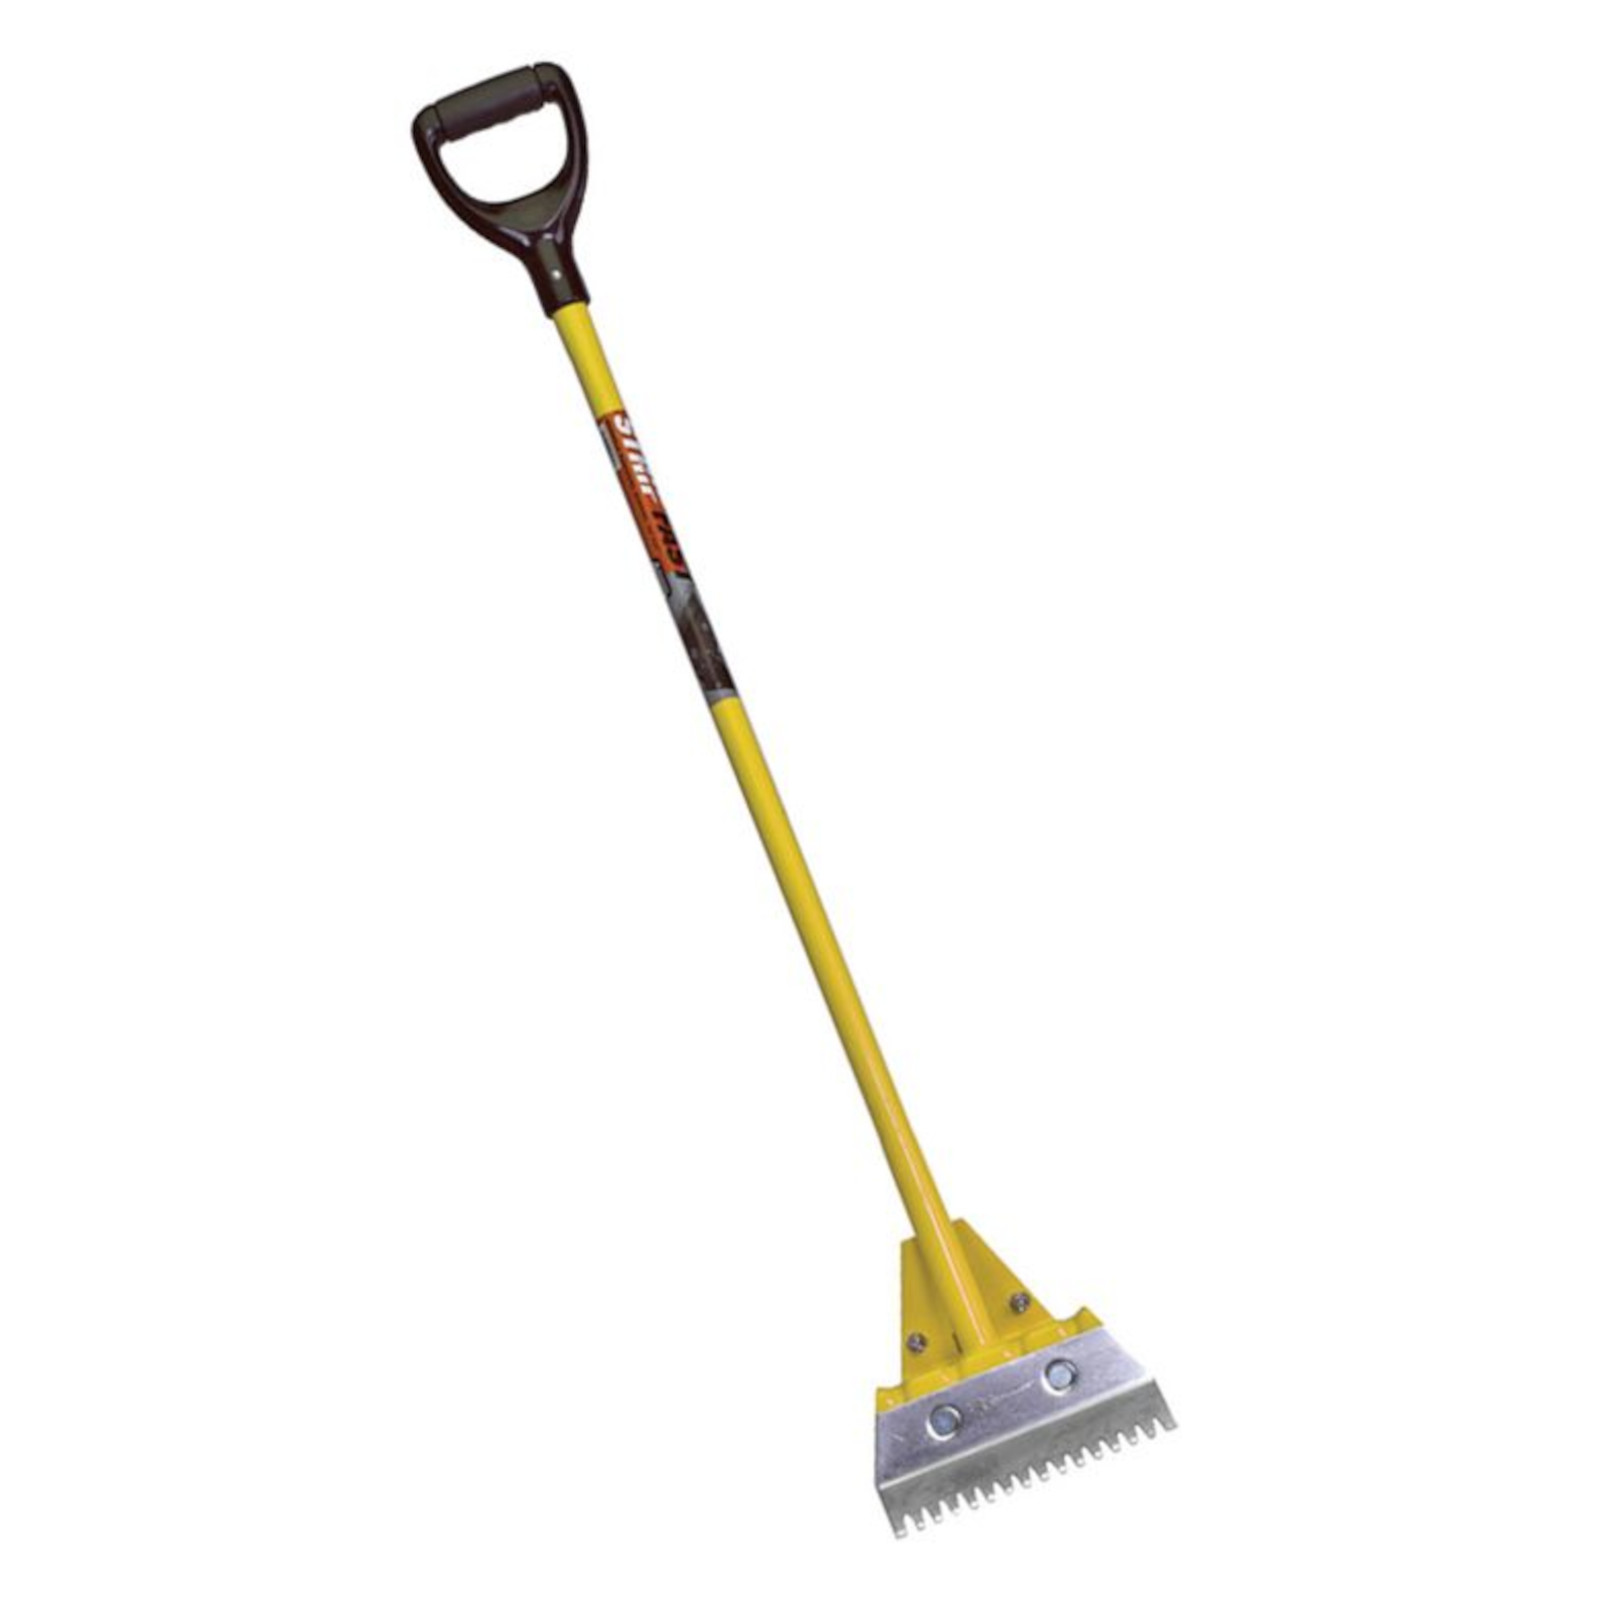 Qualcraft 54-Inch Shingle Removal Shovel #2560P Pack of 1 